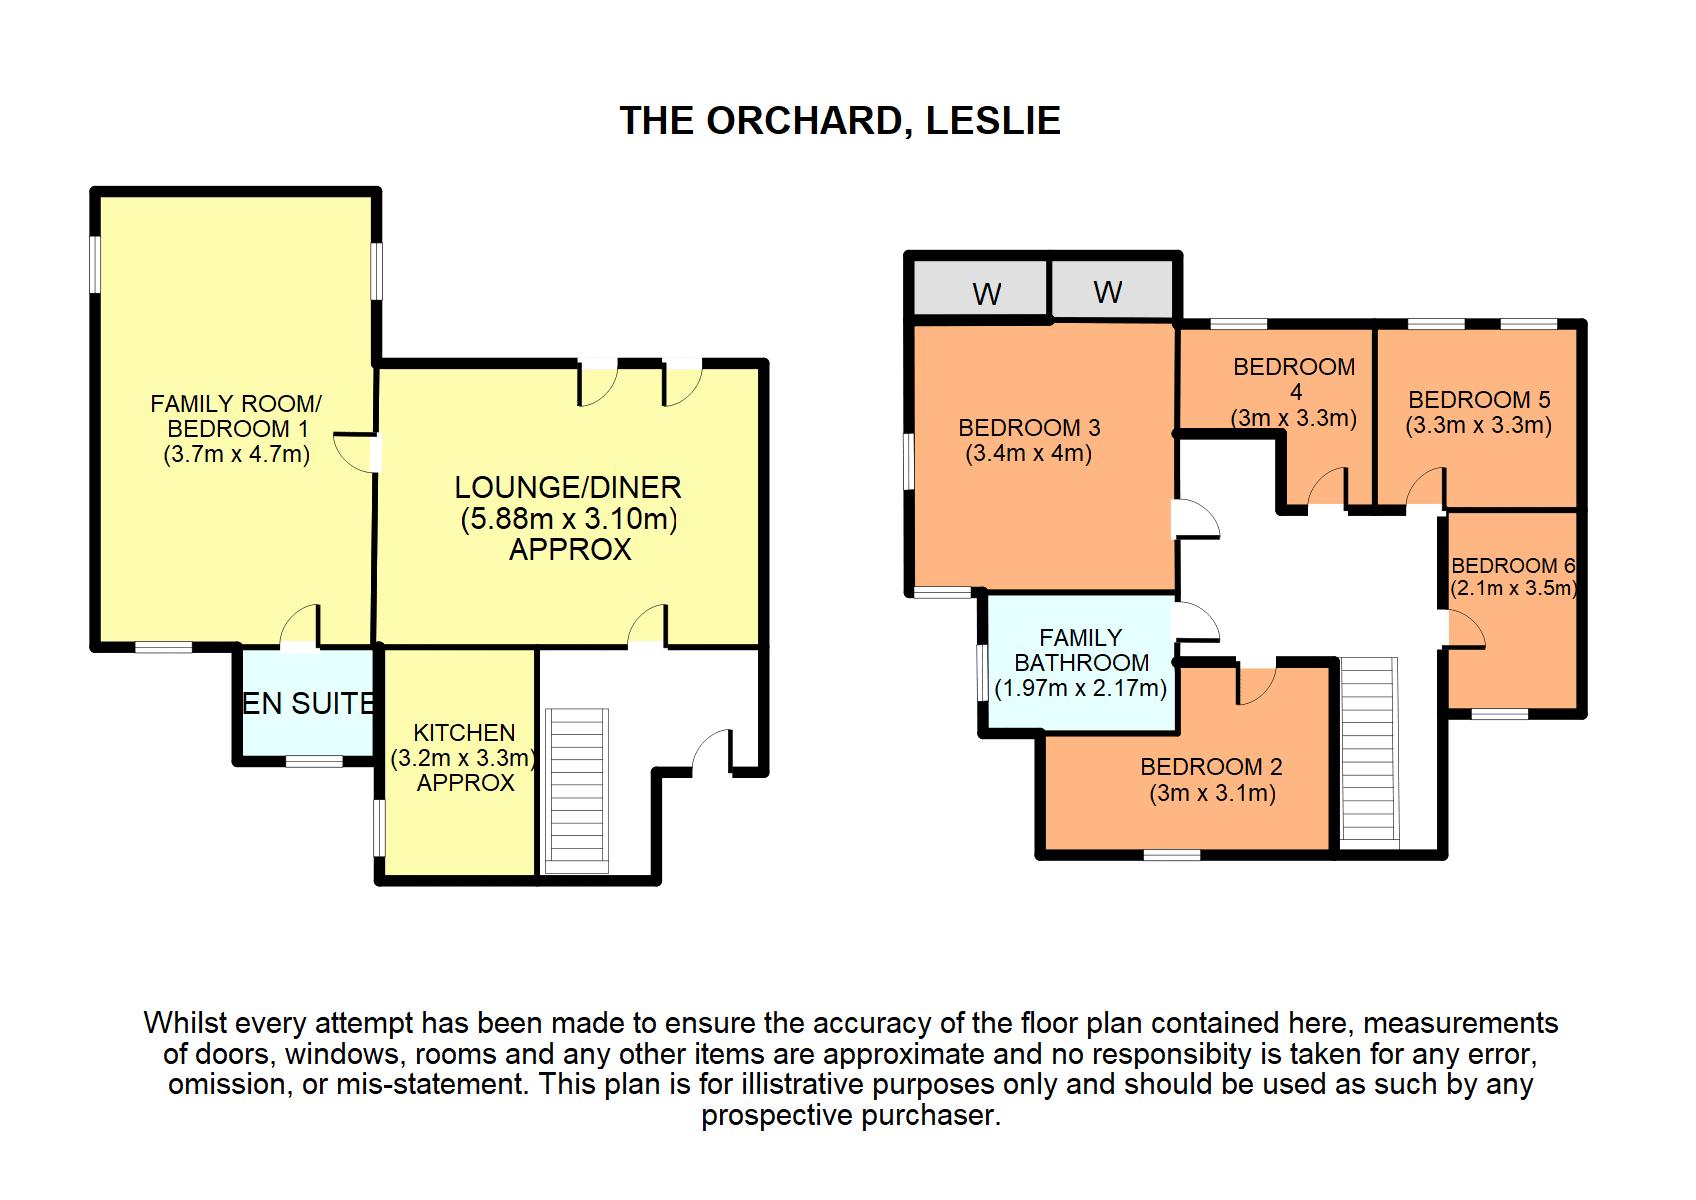 The Orchard Leslie